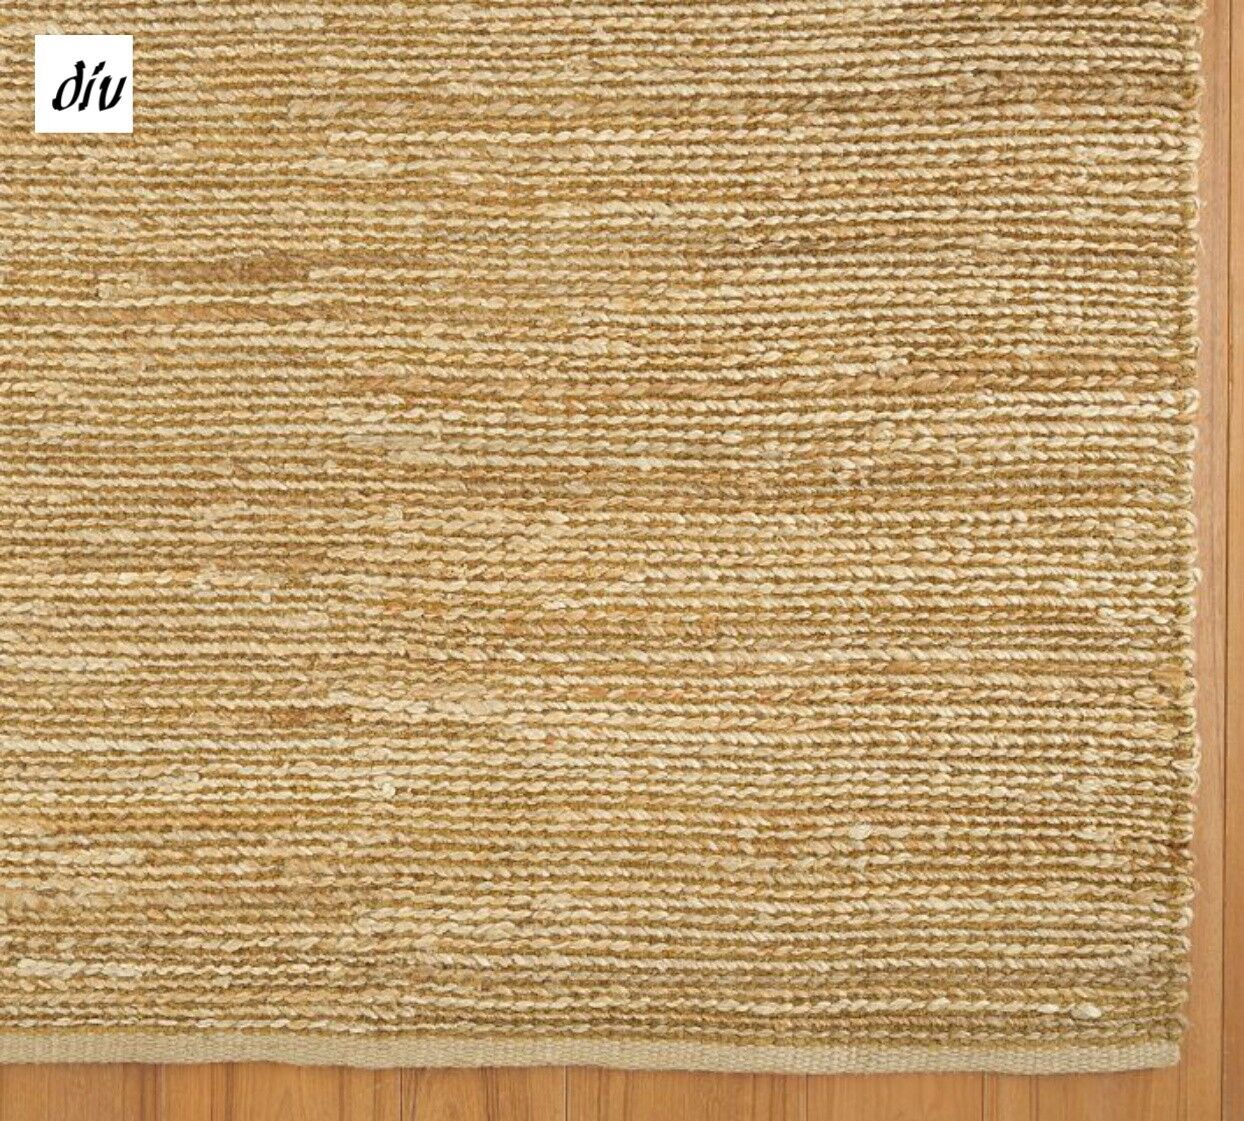 New 8 x 10 Pottery Barn heathered chenille jute Rug sold out at PB natural